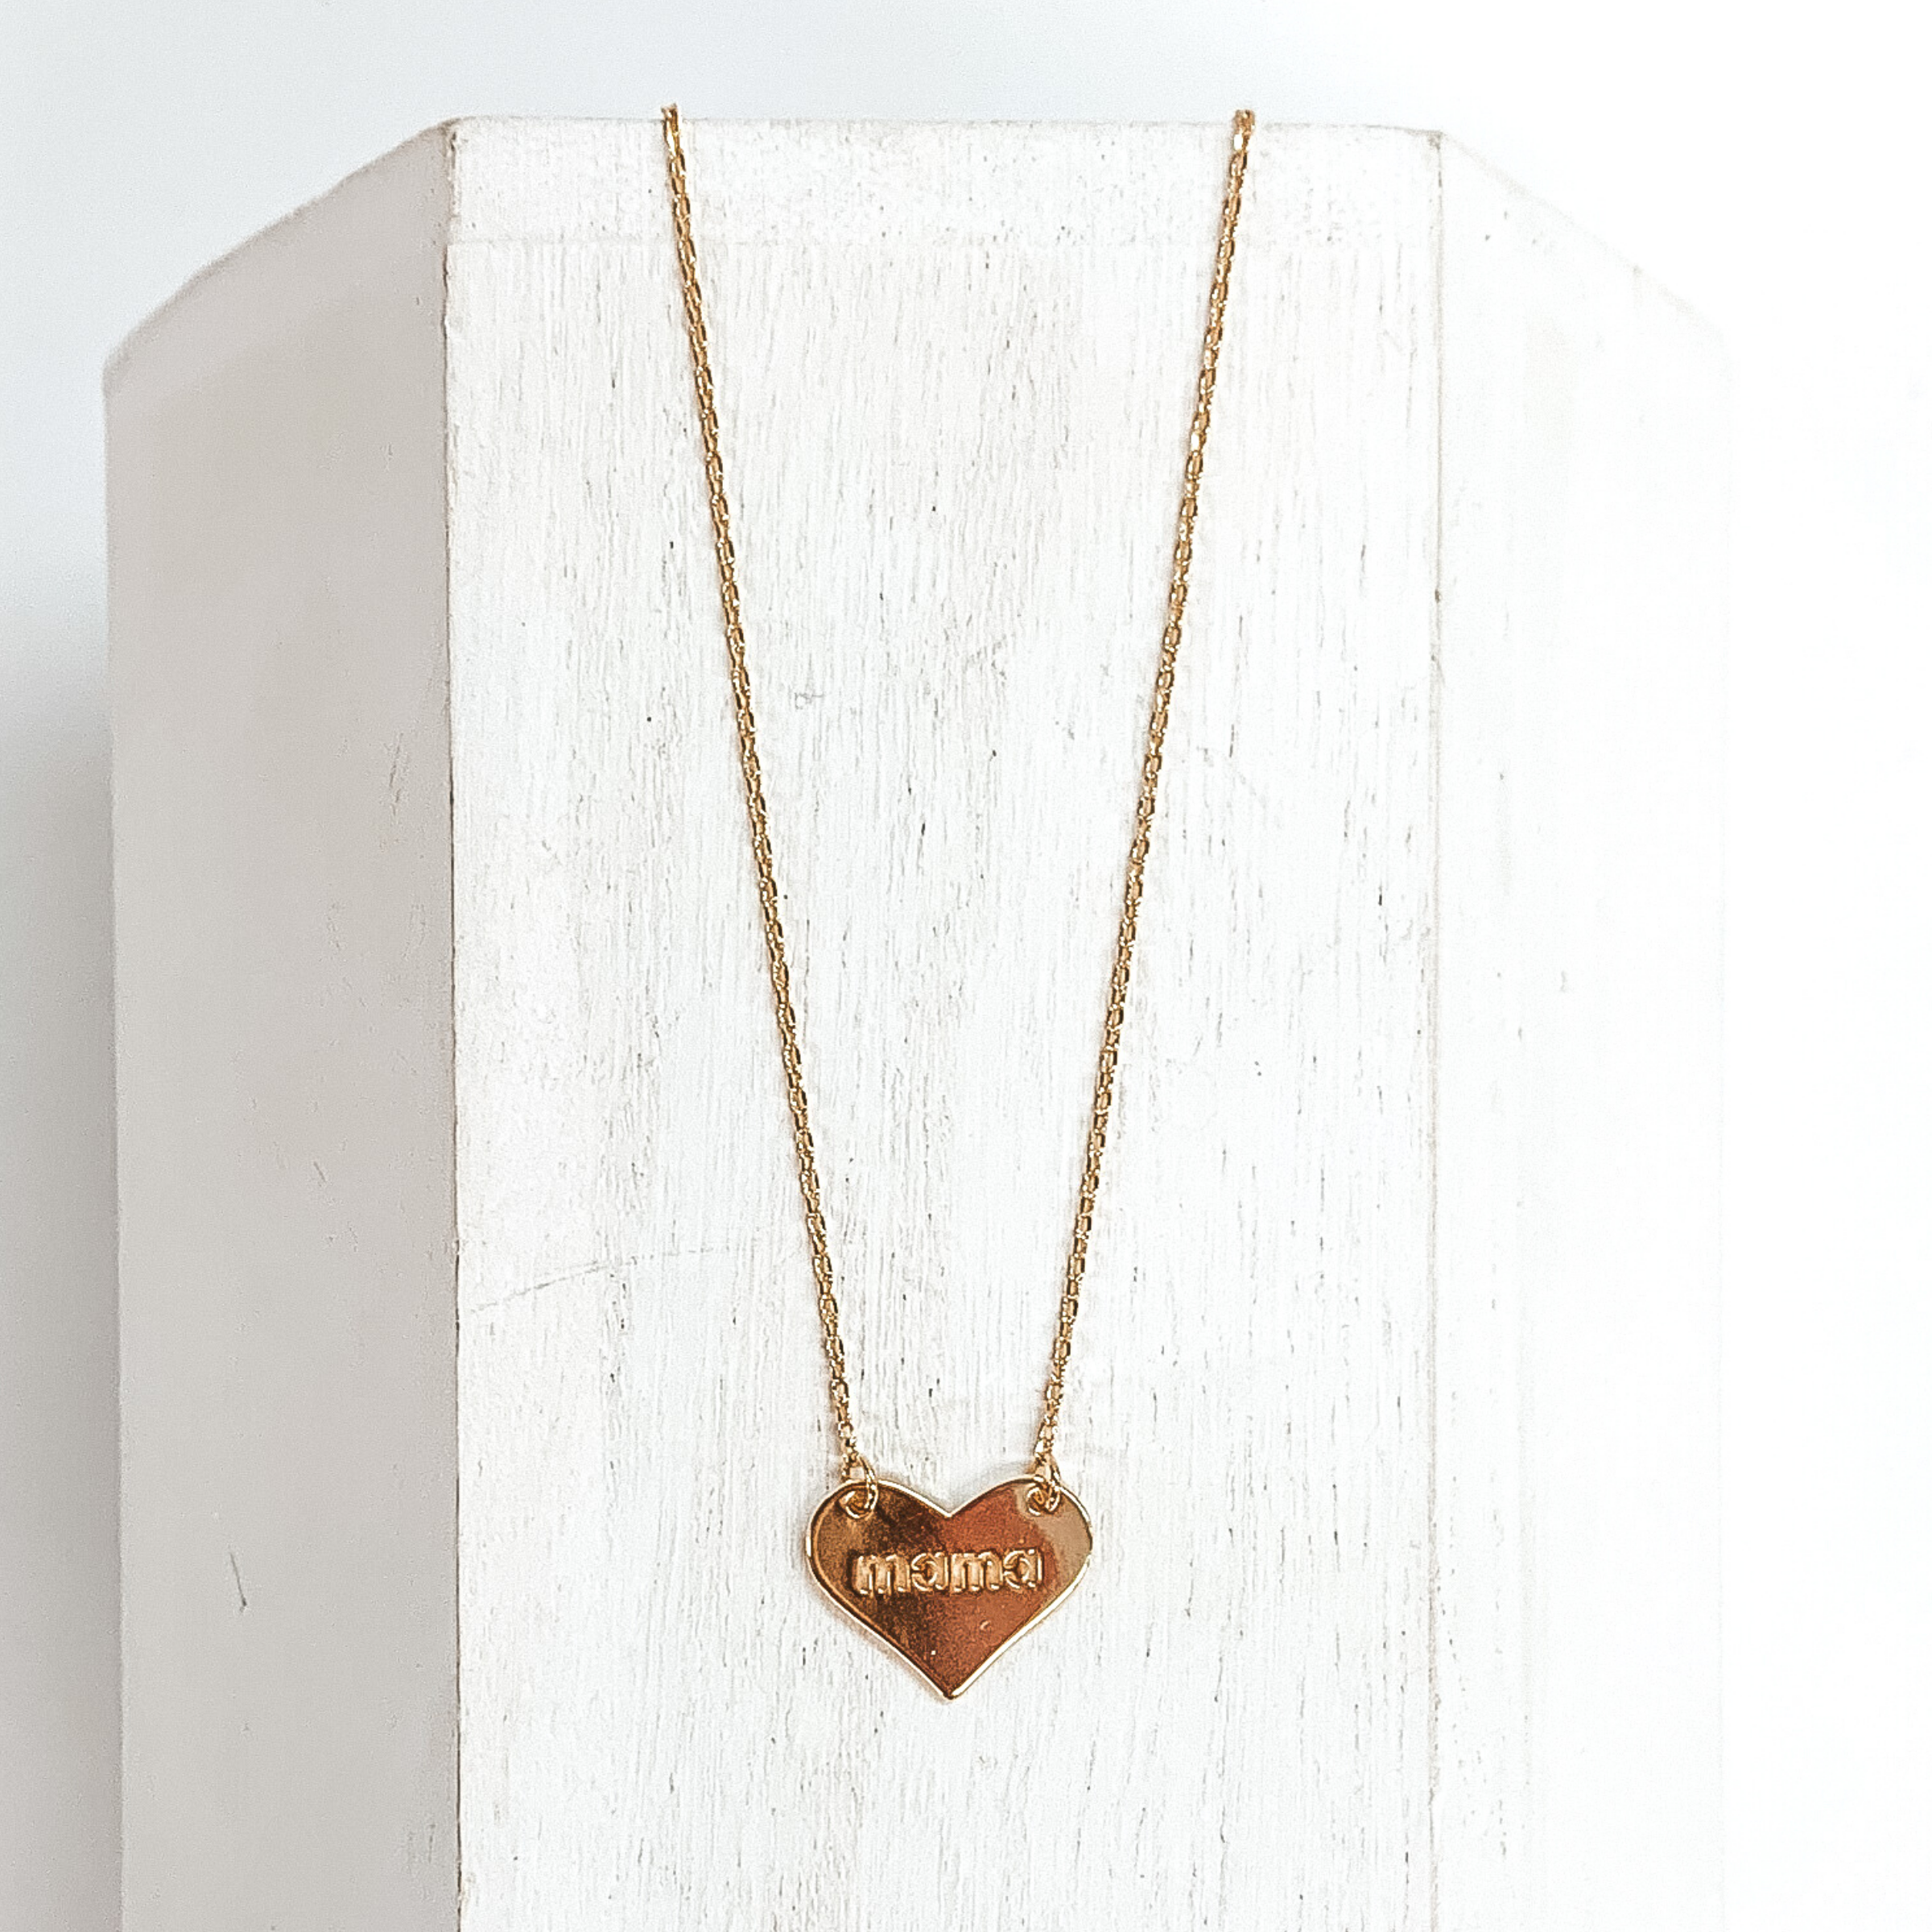 Dainty gold chained necklace with a gold heart pendant. In the center of the pendant has the word "mama" engraved. This necklace is pictured laying on a white block on a white background.